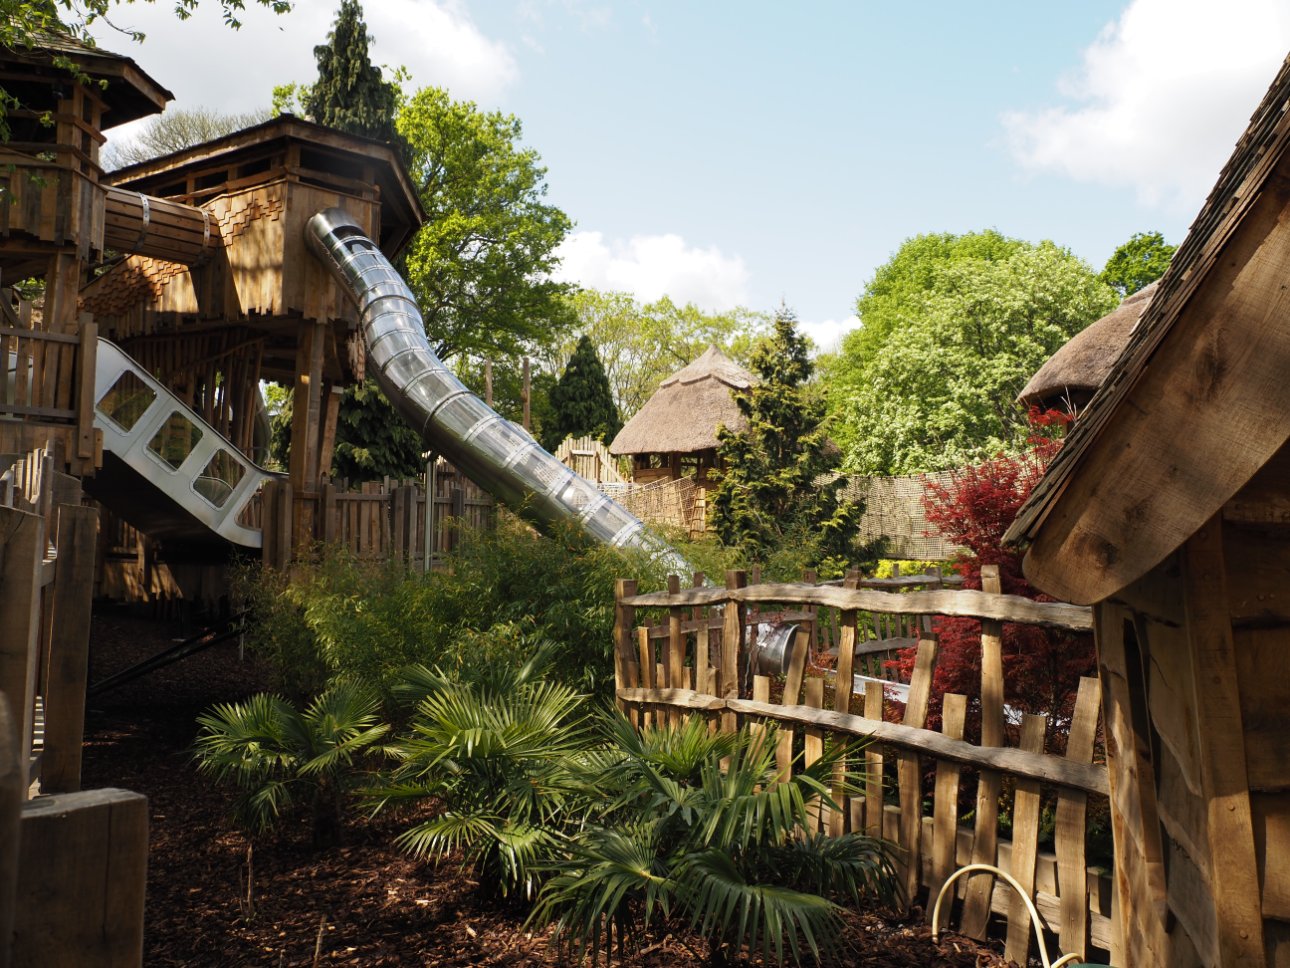 View of Adventure Play treehouses with trees and green vegetation.